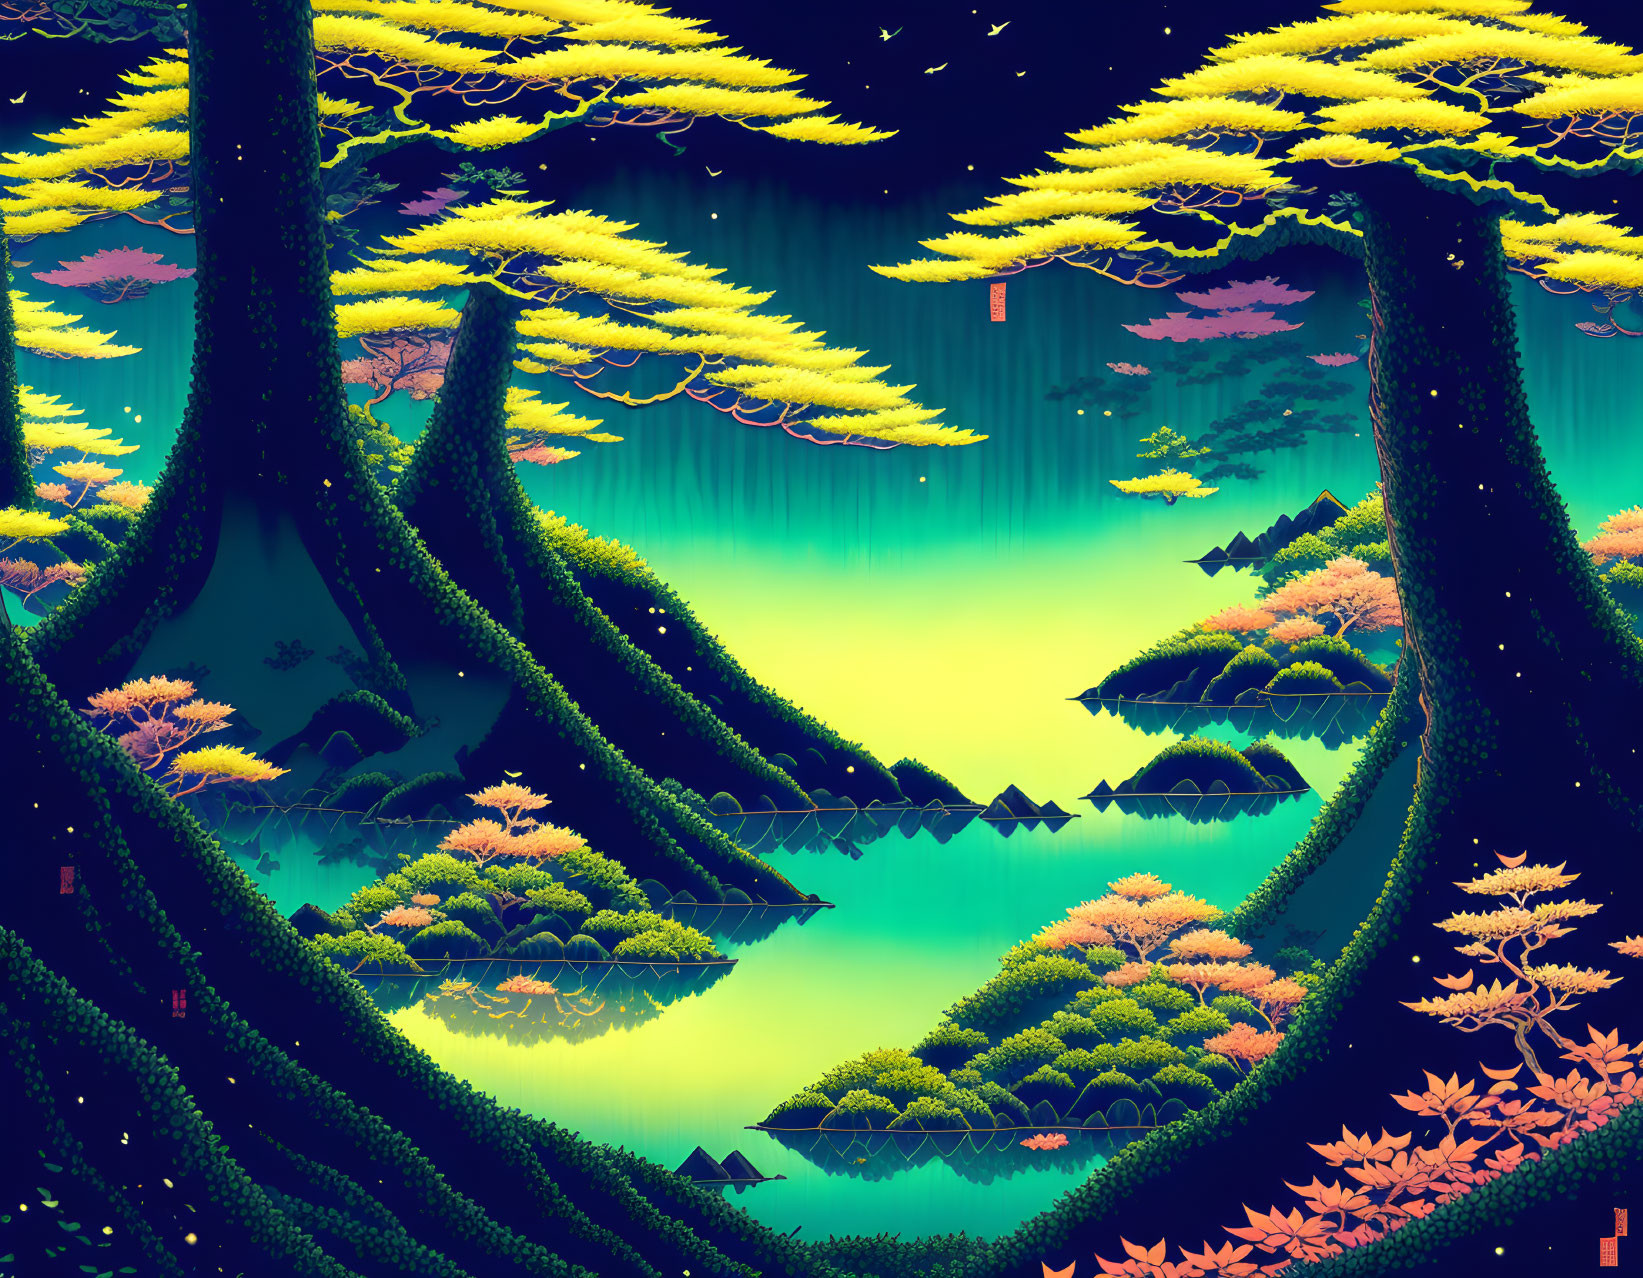 Fantastical forest scene with glowing hues and stylized trees